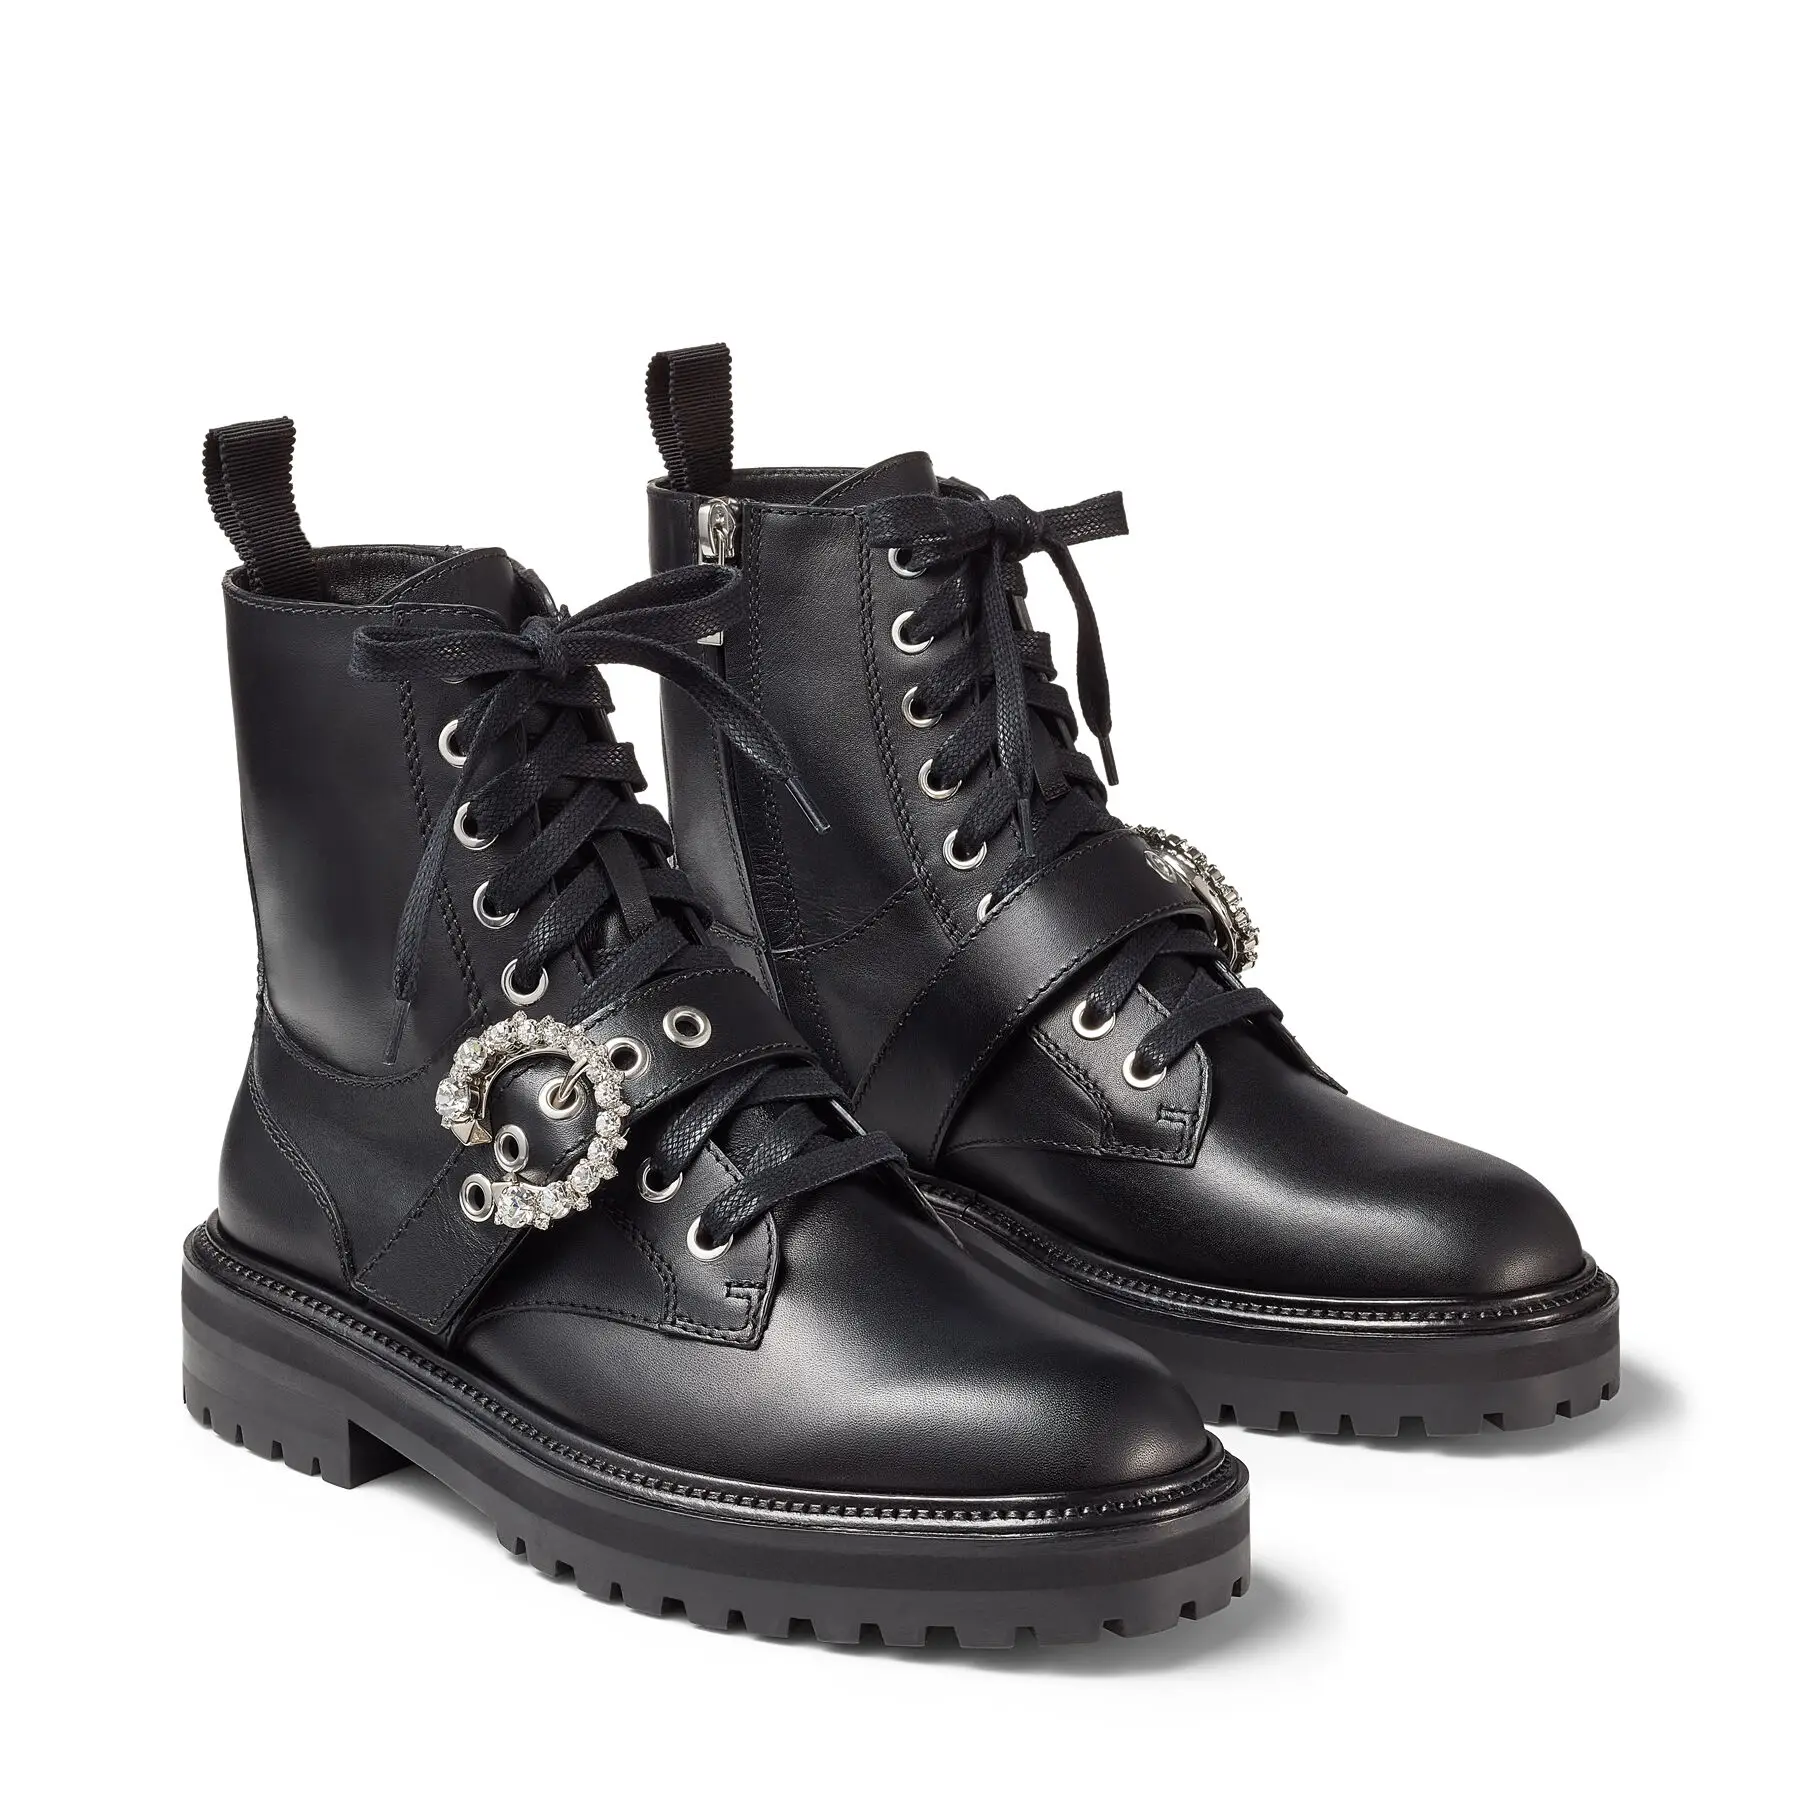 

New Season Shoes London Cora Flat Black Soft Calf Leather Combat Boots Sparkling Crystal Buckle Italy Chunky Sole